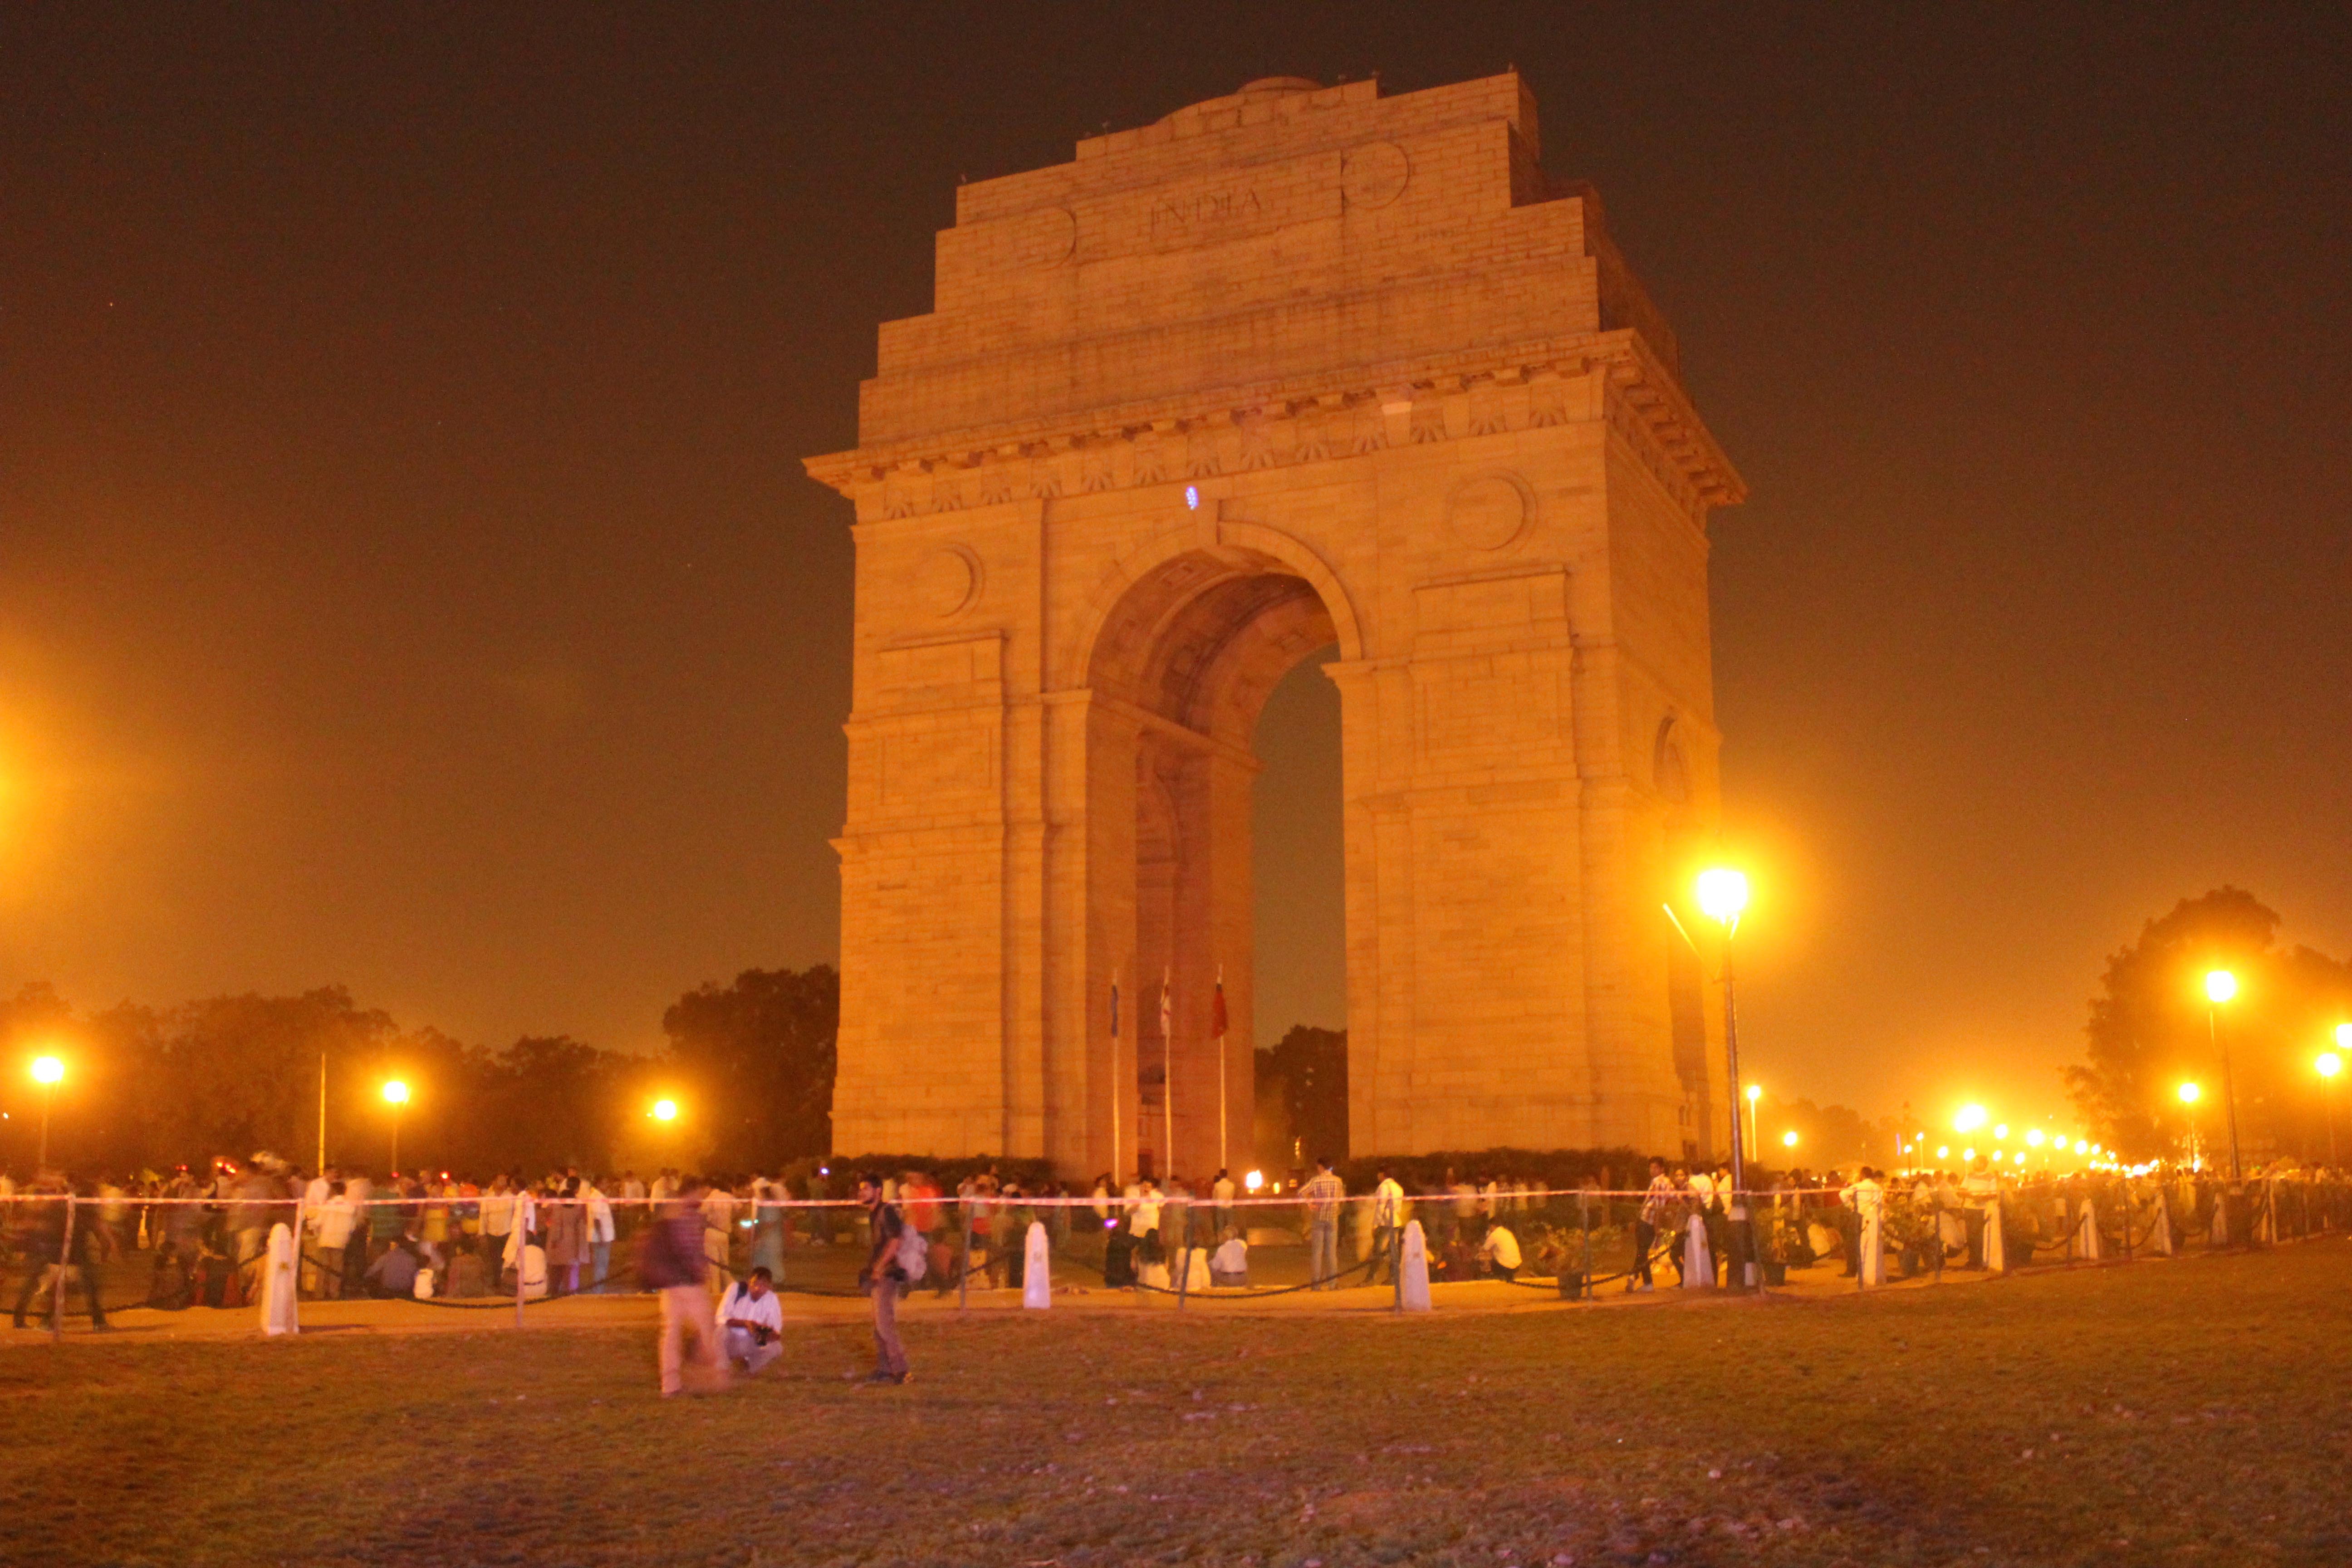 India Gate, A National Monument of India